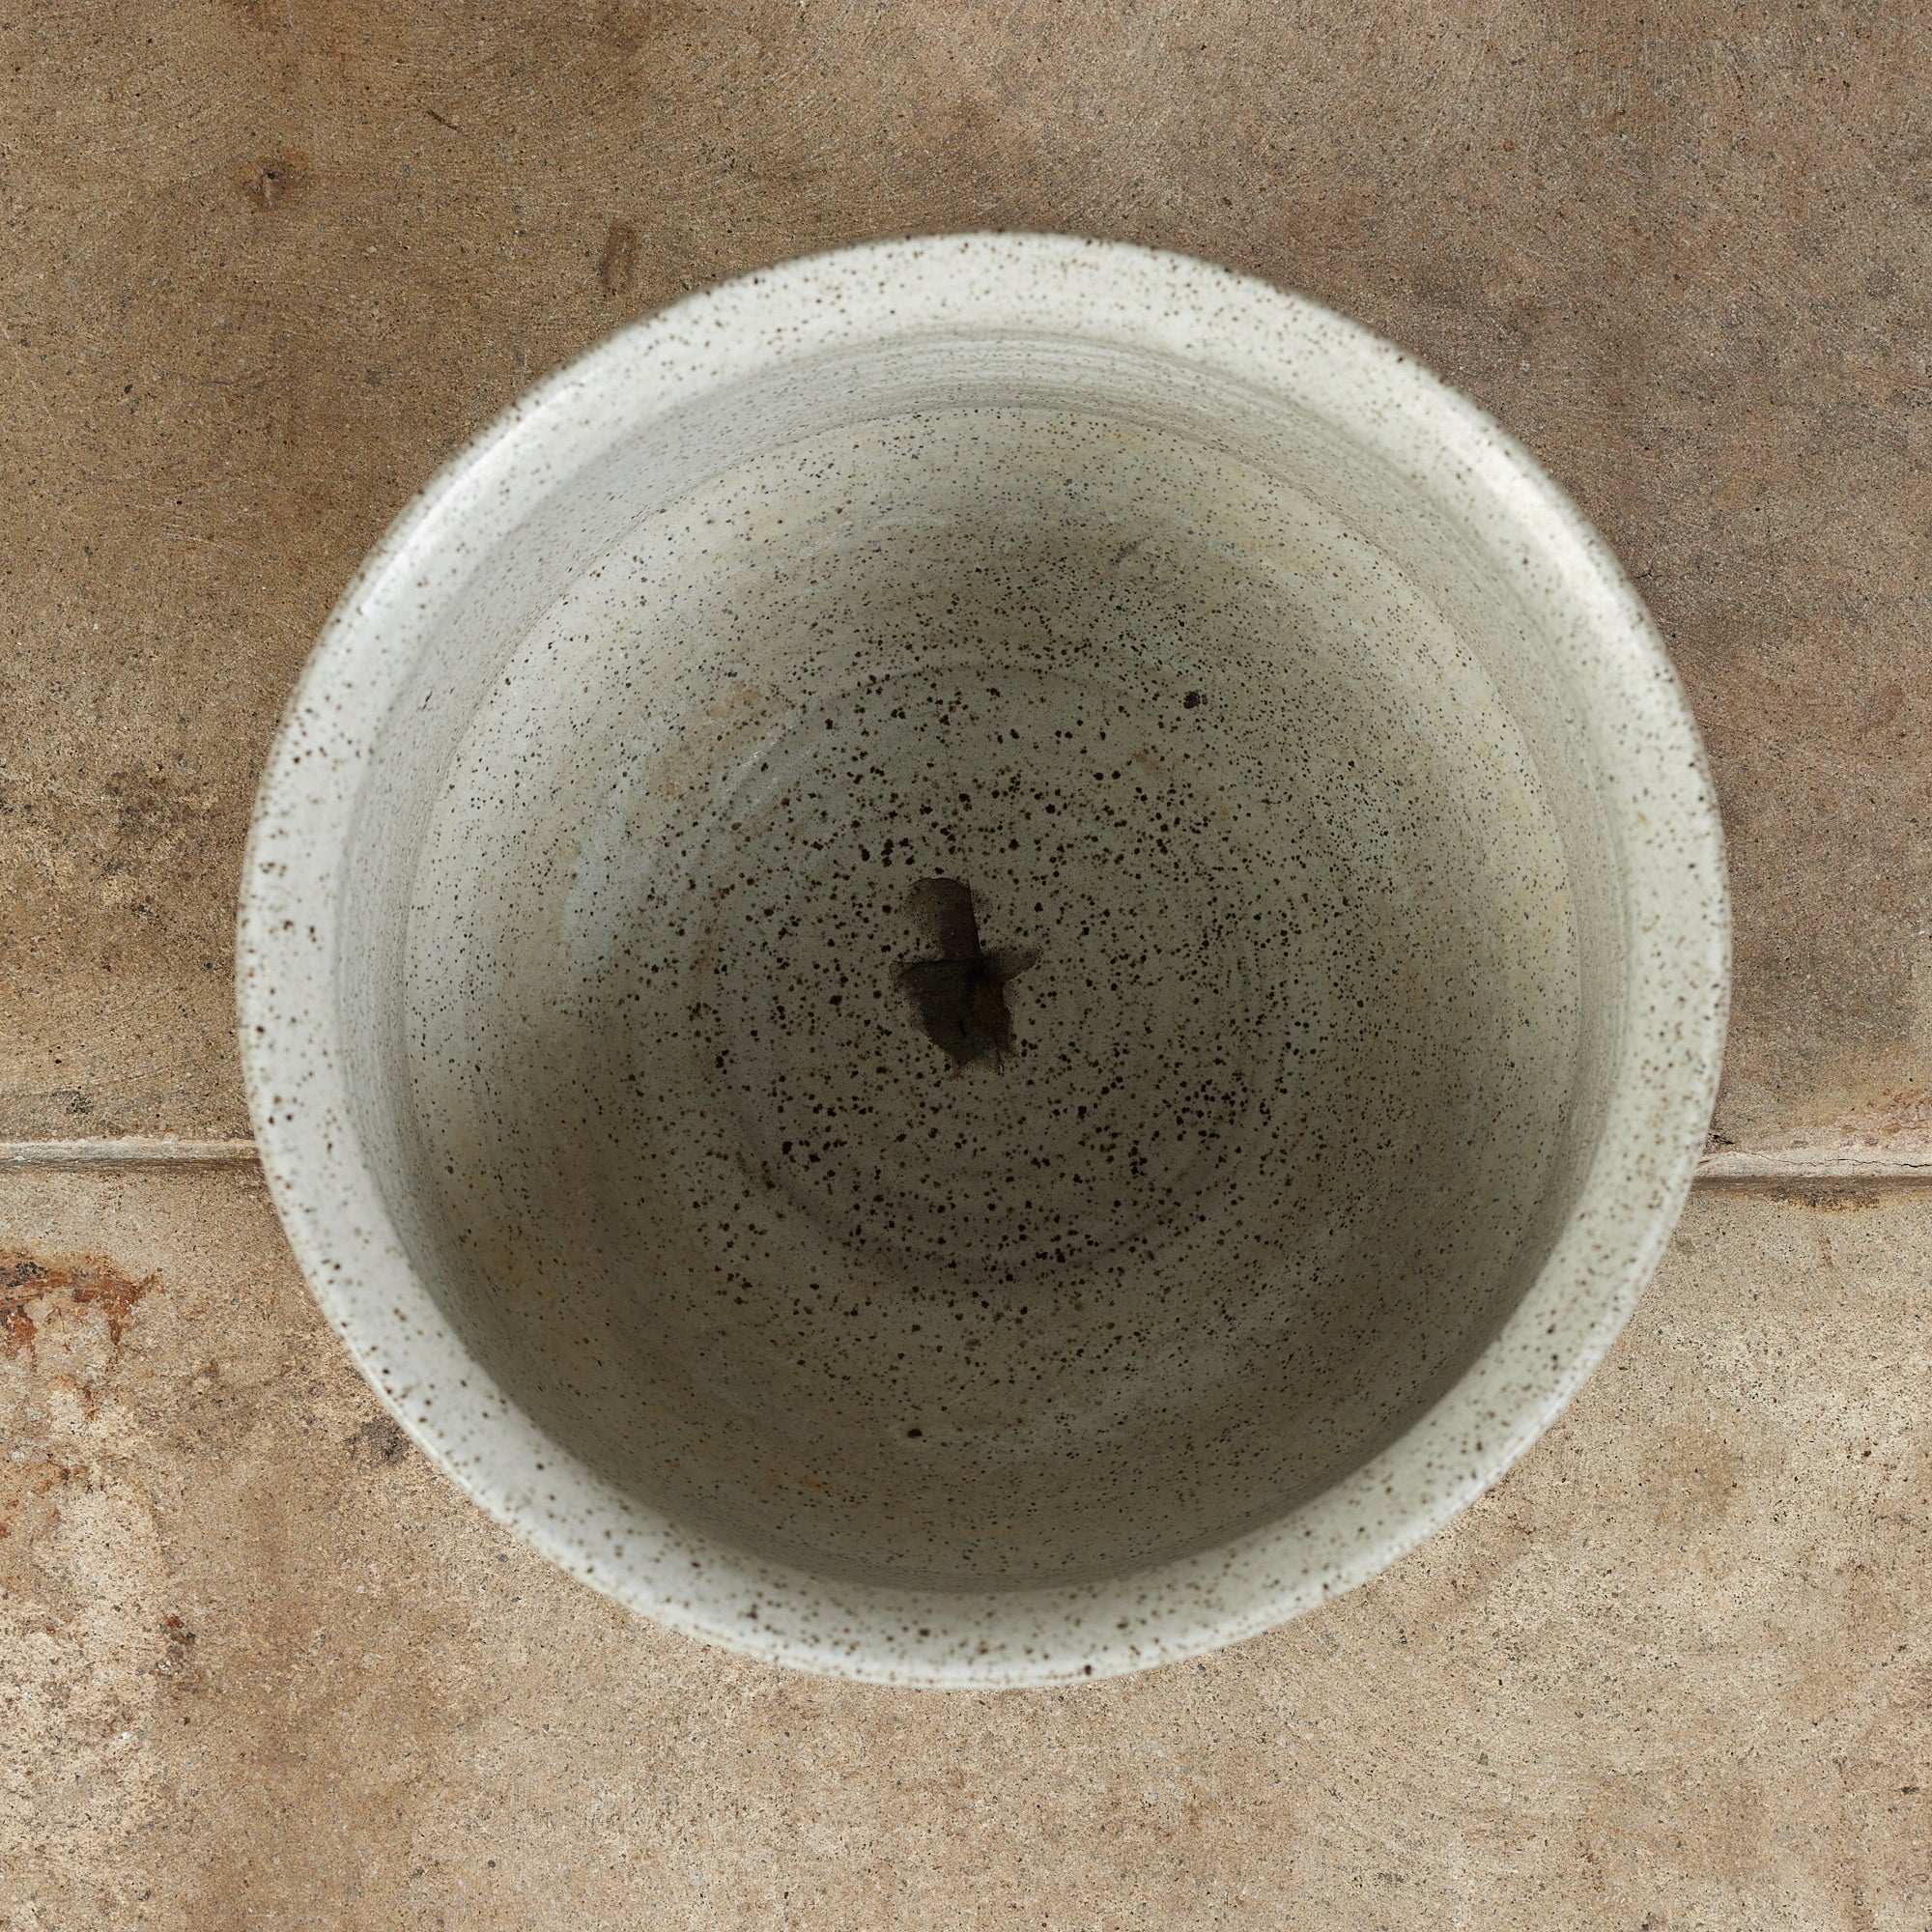 David Cressey Pro/Artisan Planter for Architectural Pottery